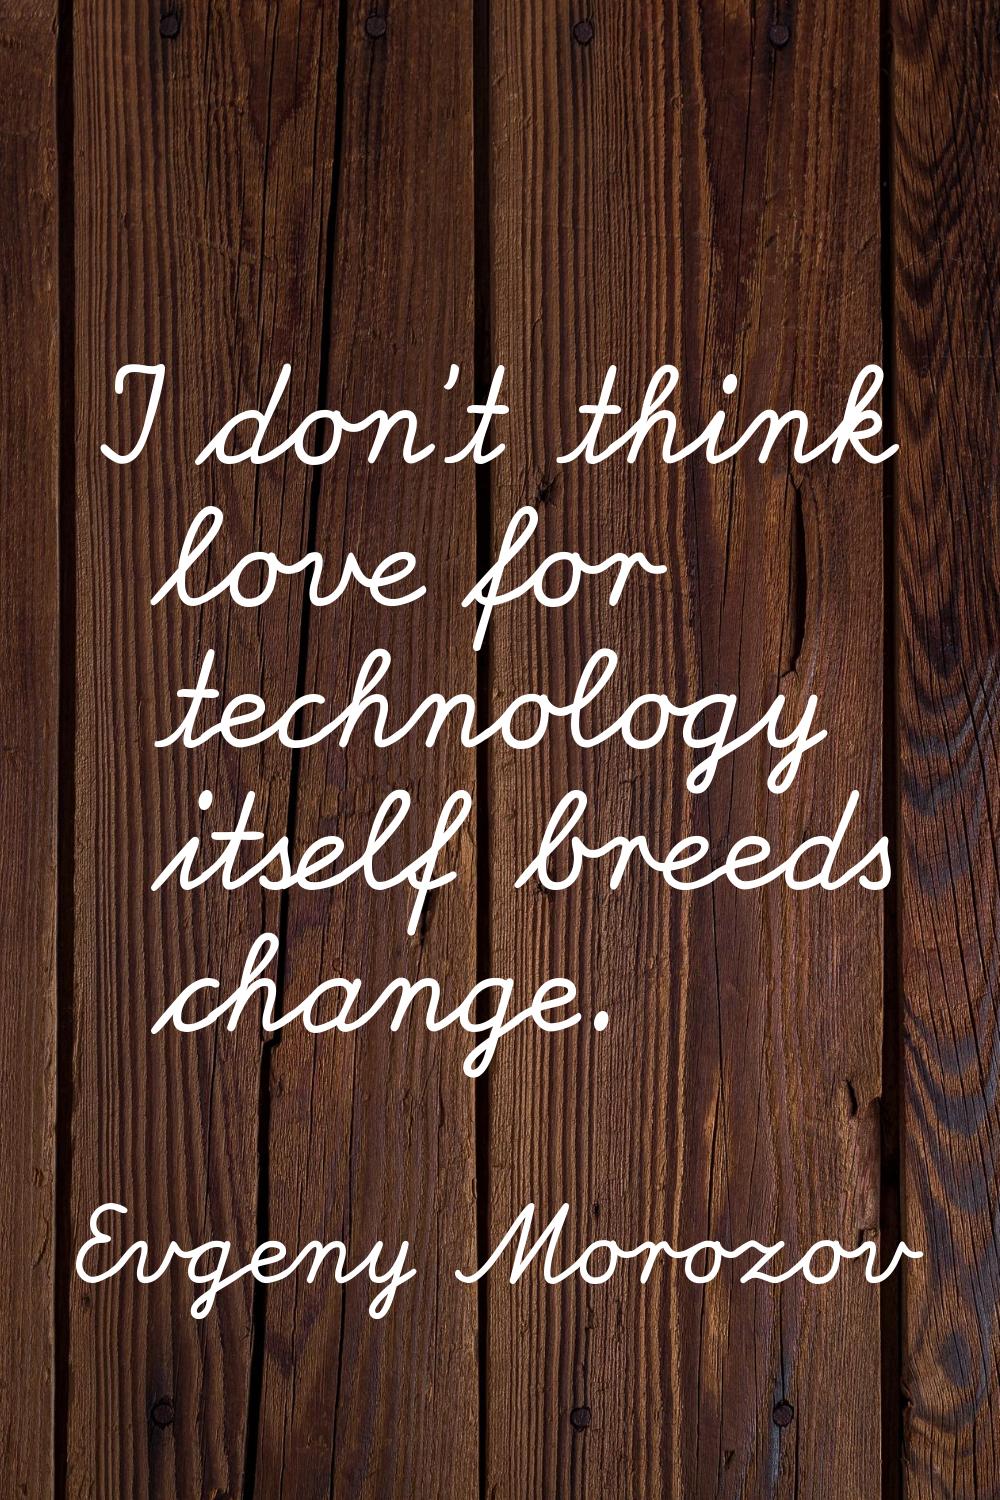 I don't think love for technology itself breeds change.